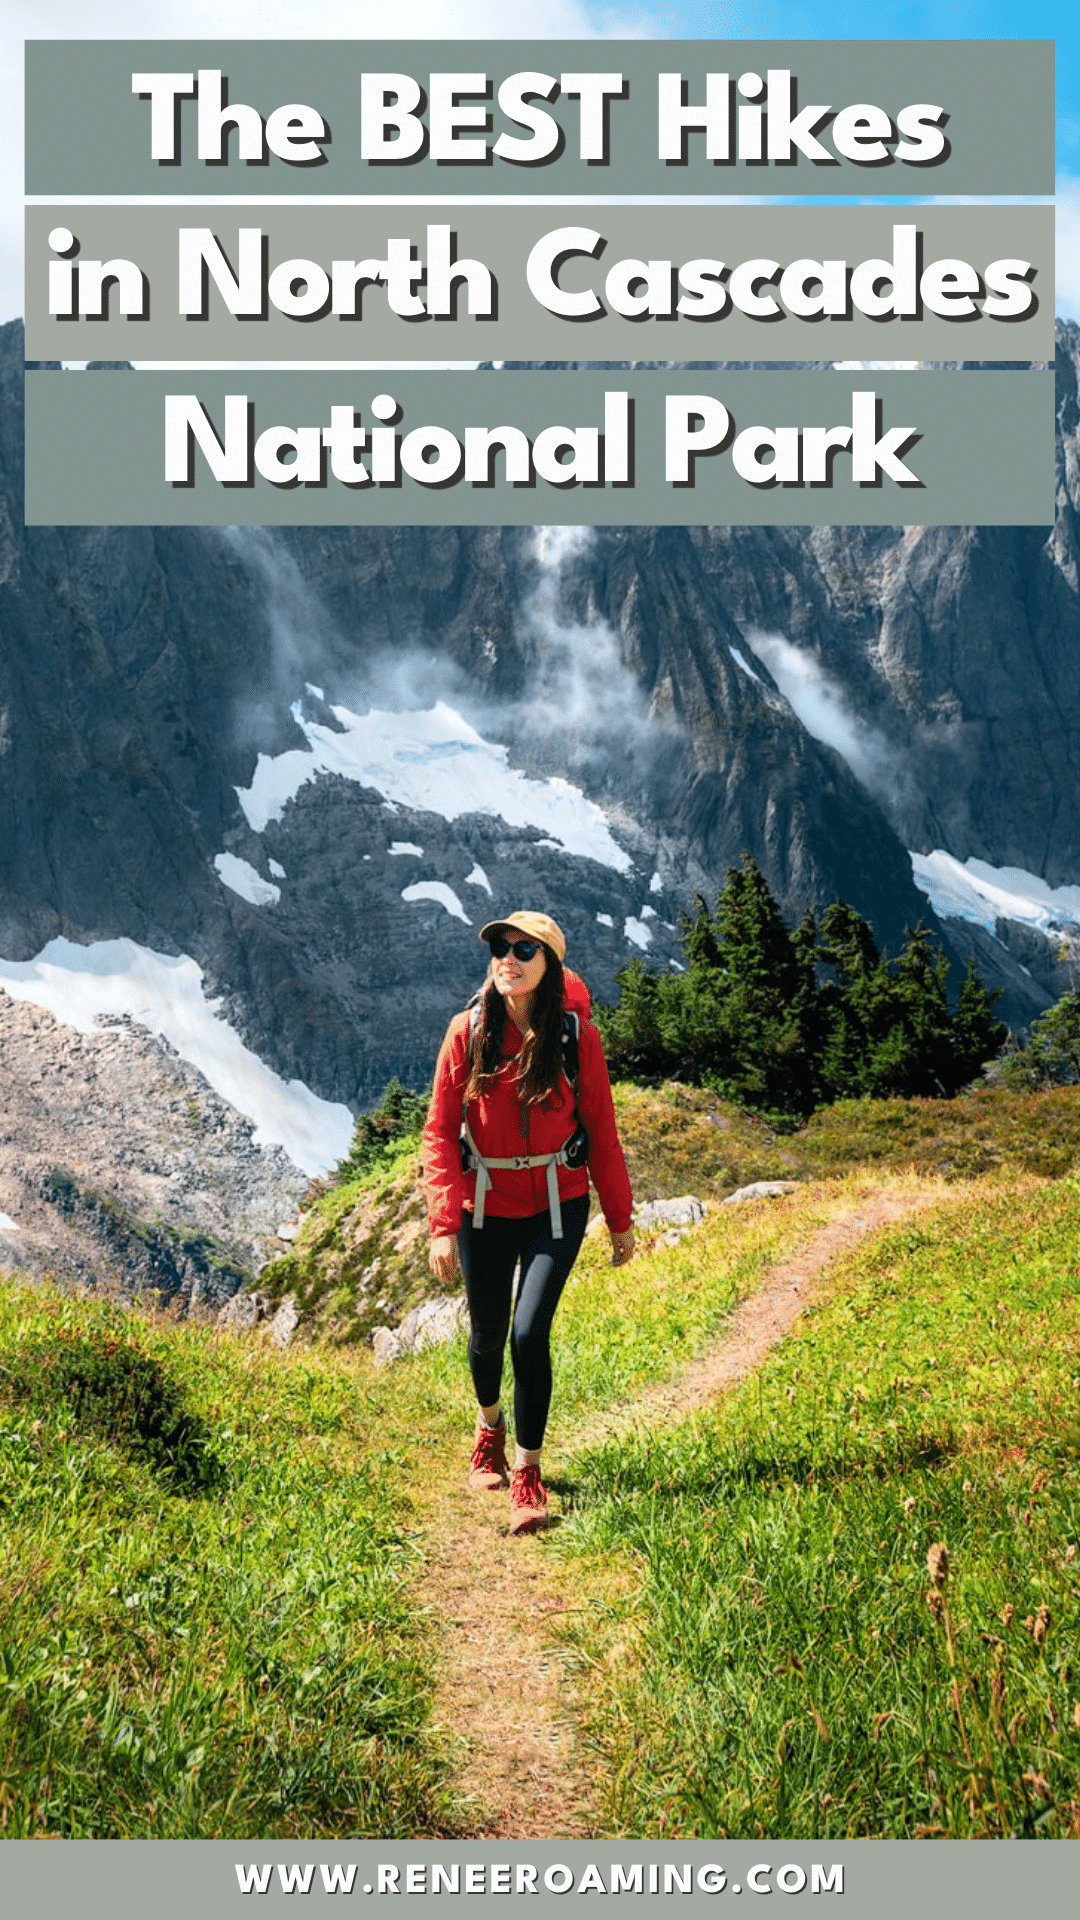 6 Absolute BEST Hikes in North Cascades National Park